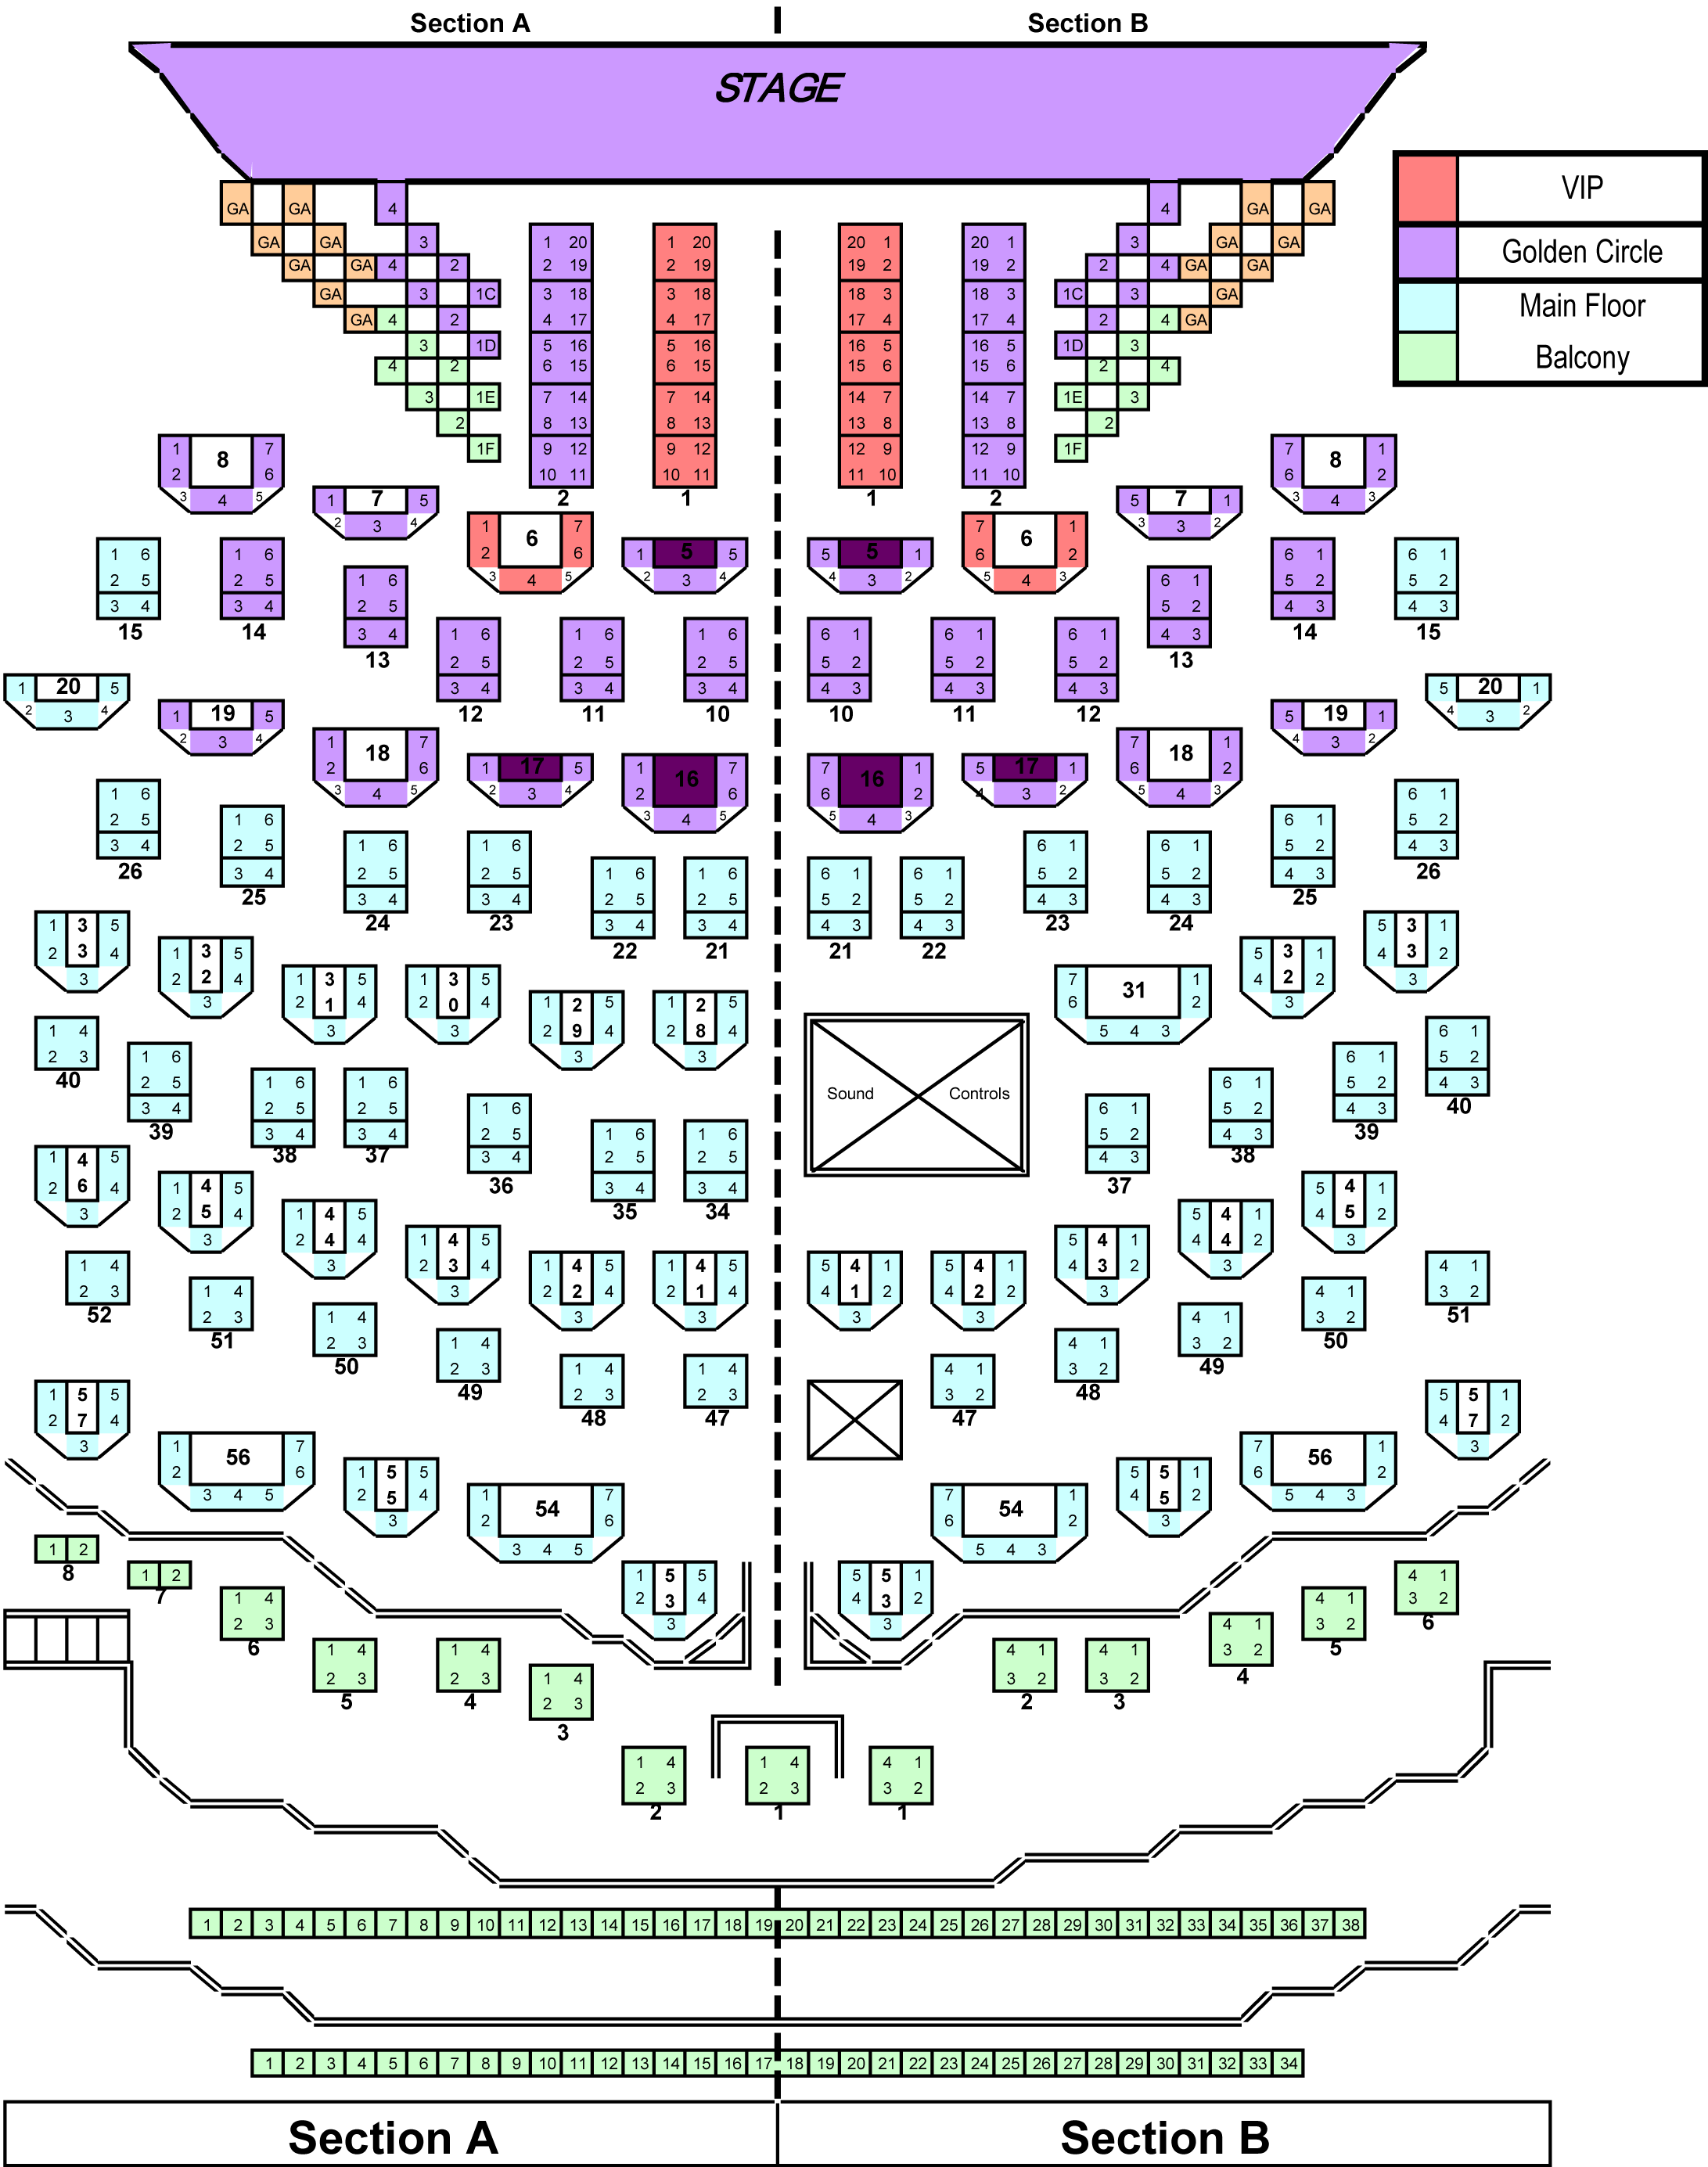 Flamingo Las Vegas Donny And Seating Chart